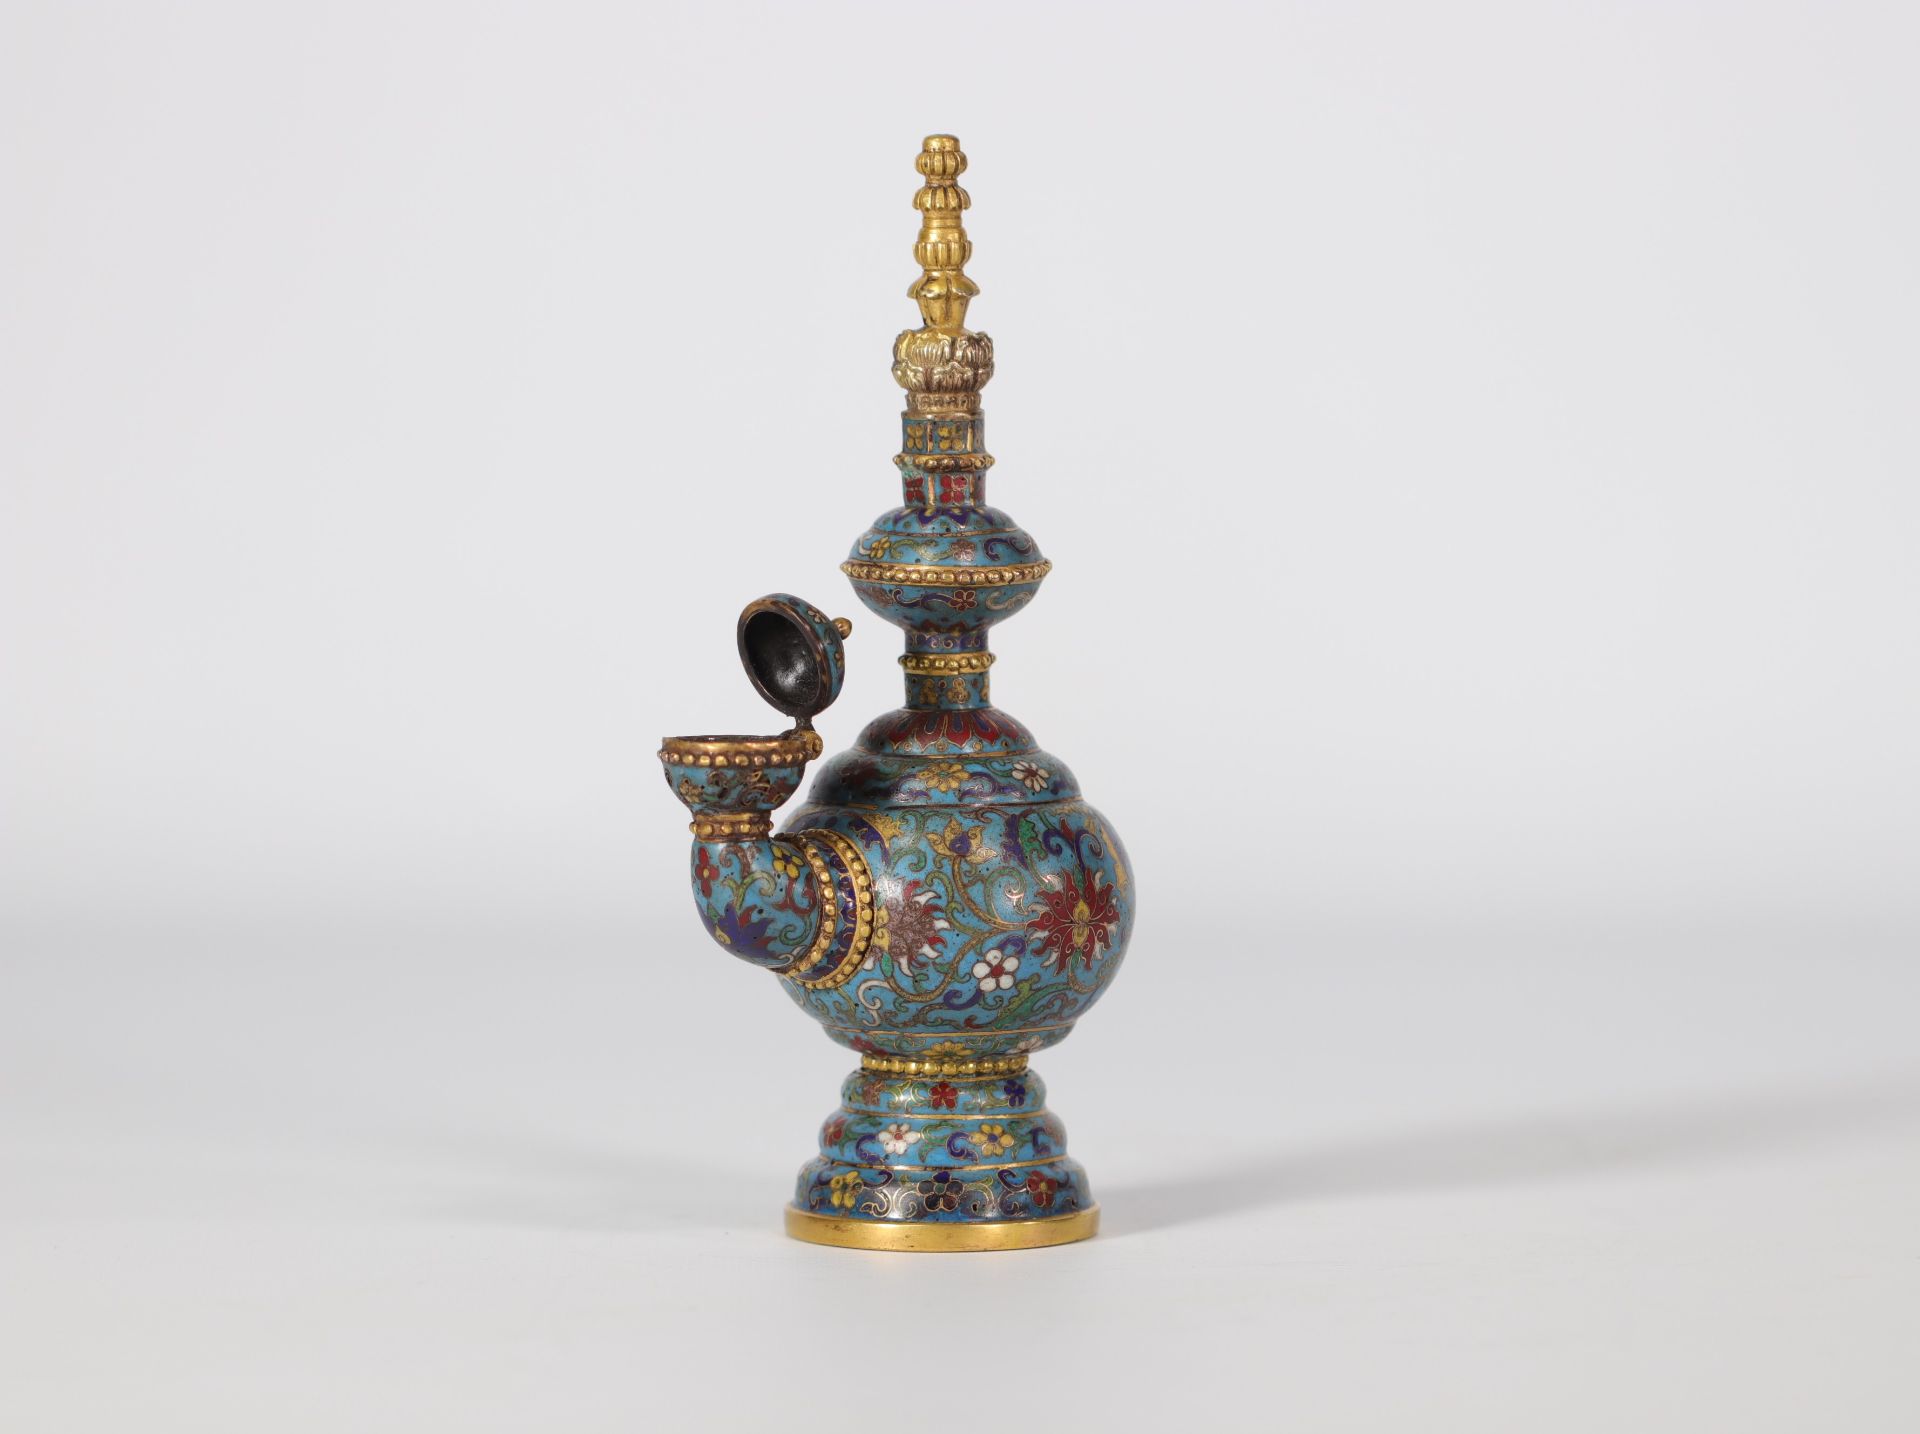 Cloisonne vase with lotus design on a blue background with Qianlong mark from 18th century - Image 2 of 5